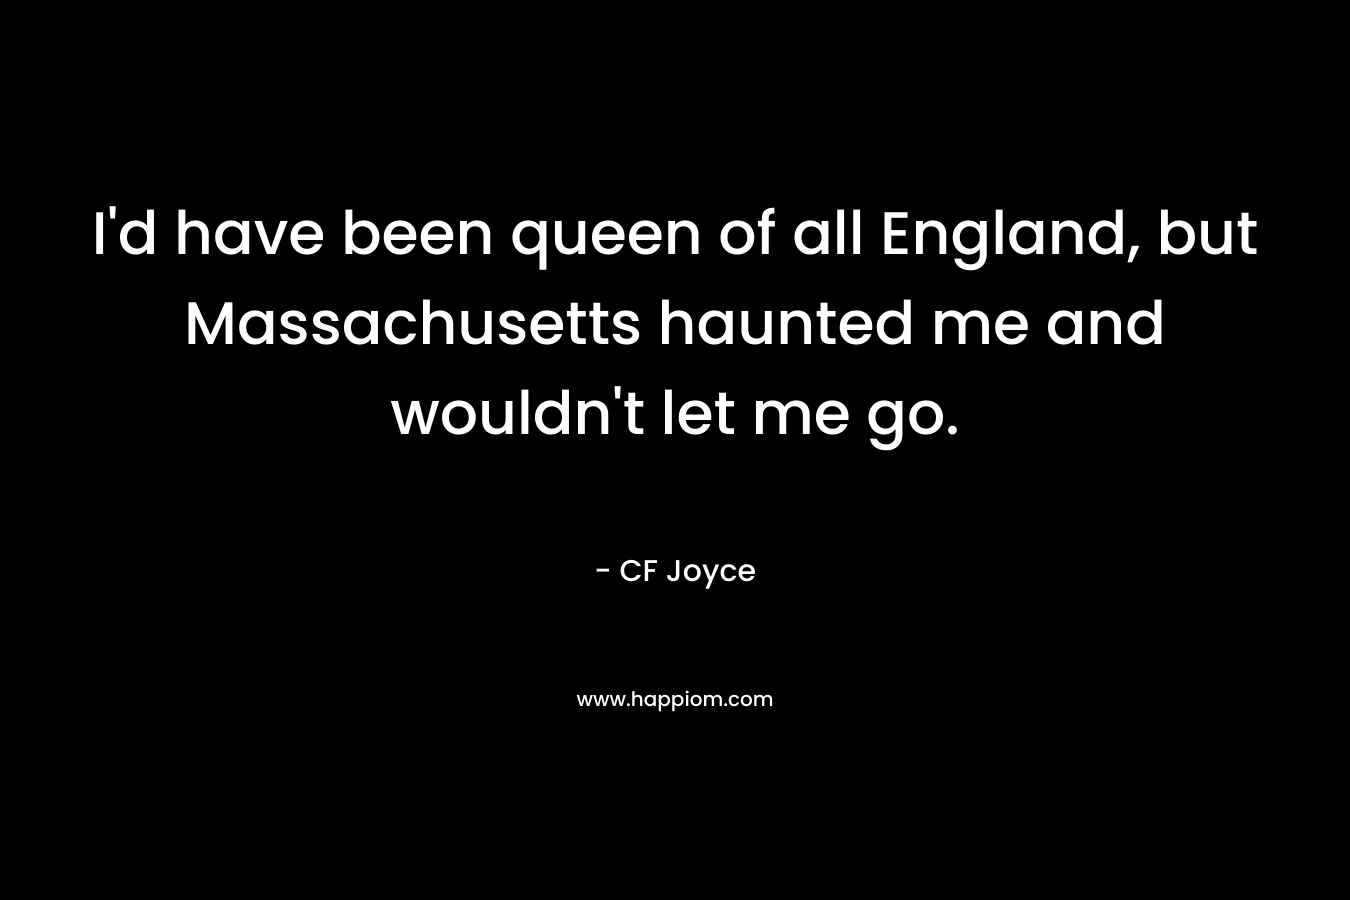 I’d have been queen of all England, but Massachusetts haunted me and wouldn’t let me go. – CF Joyce